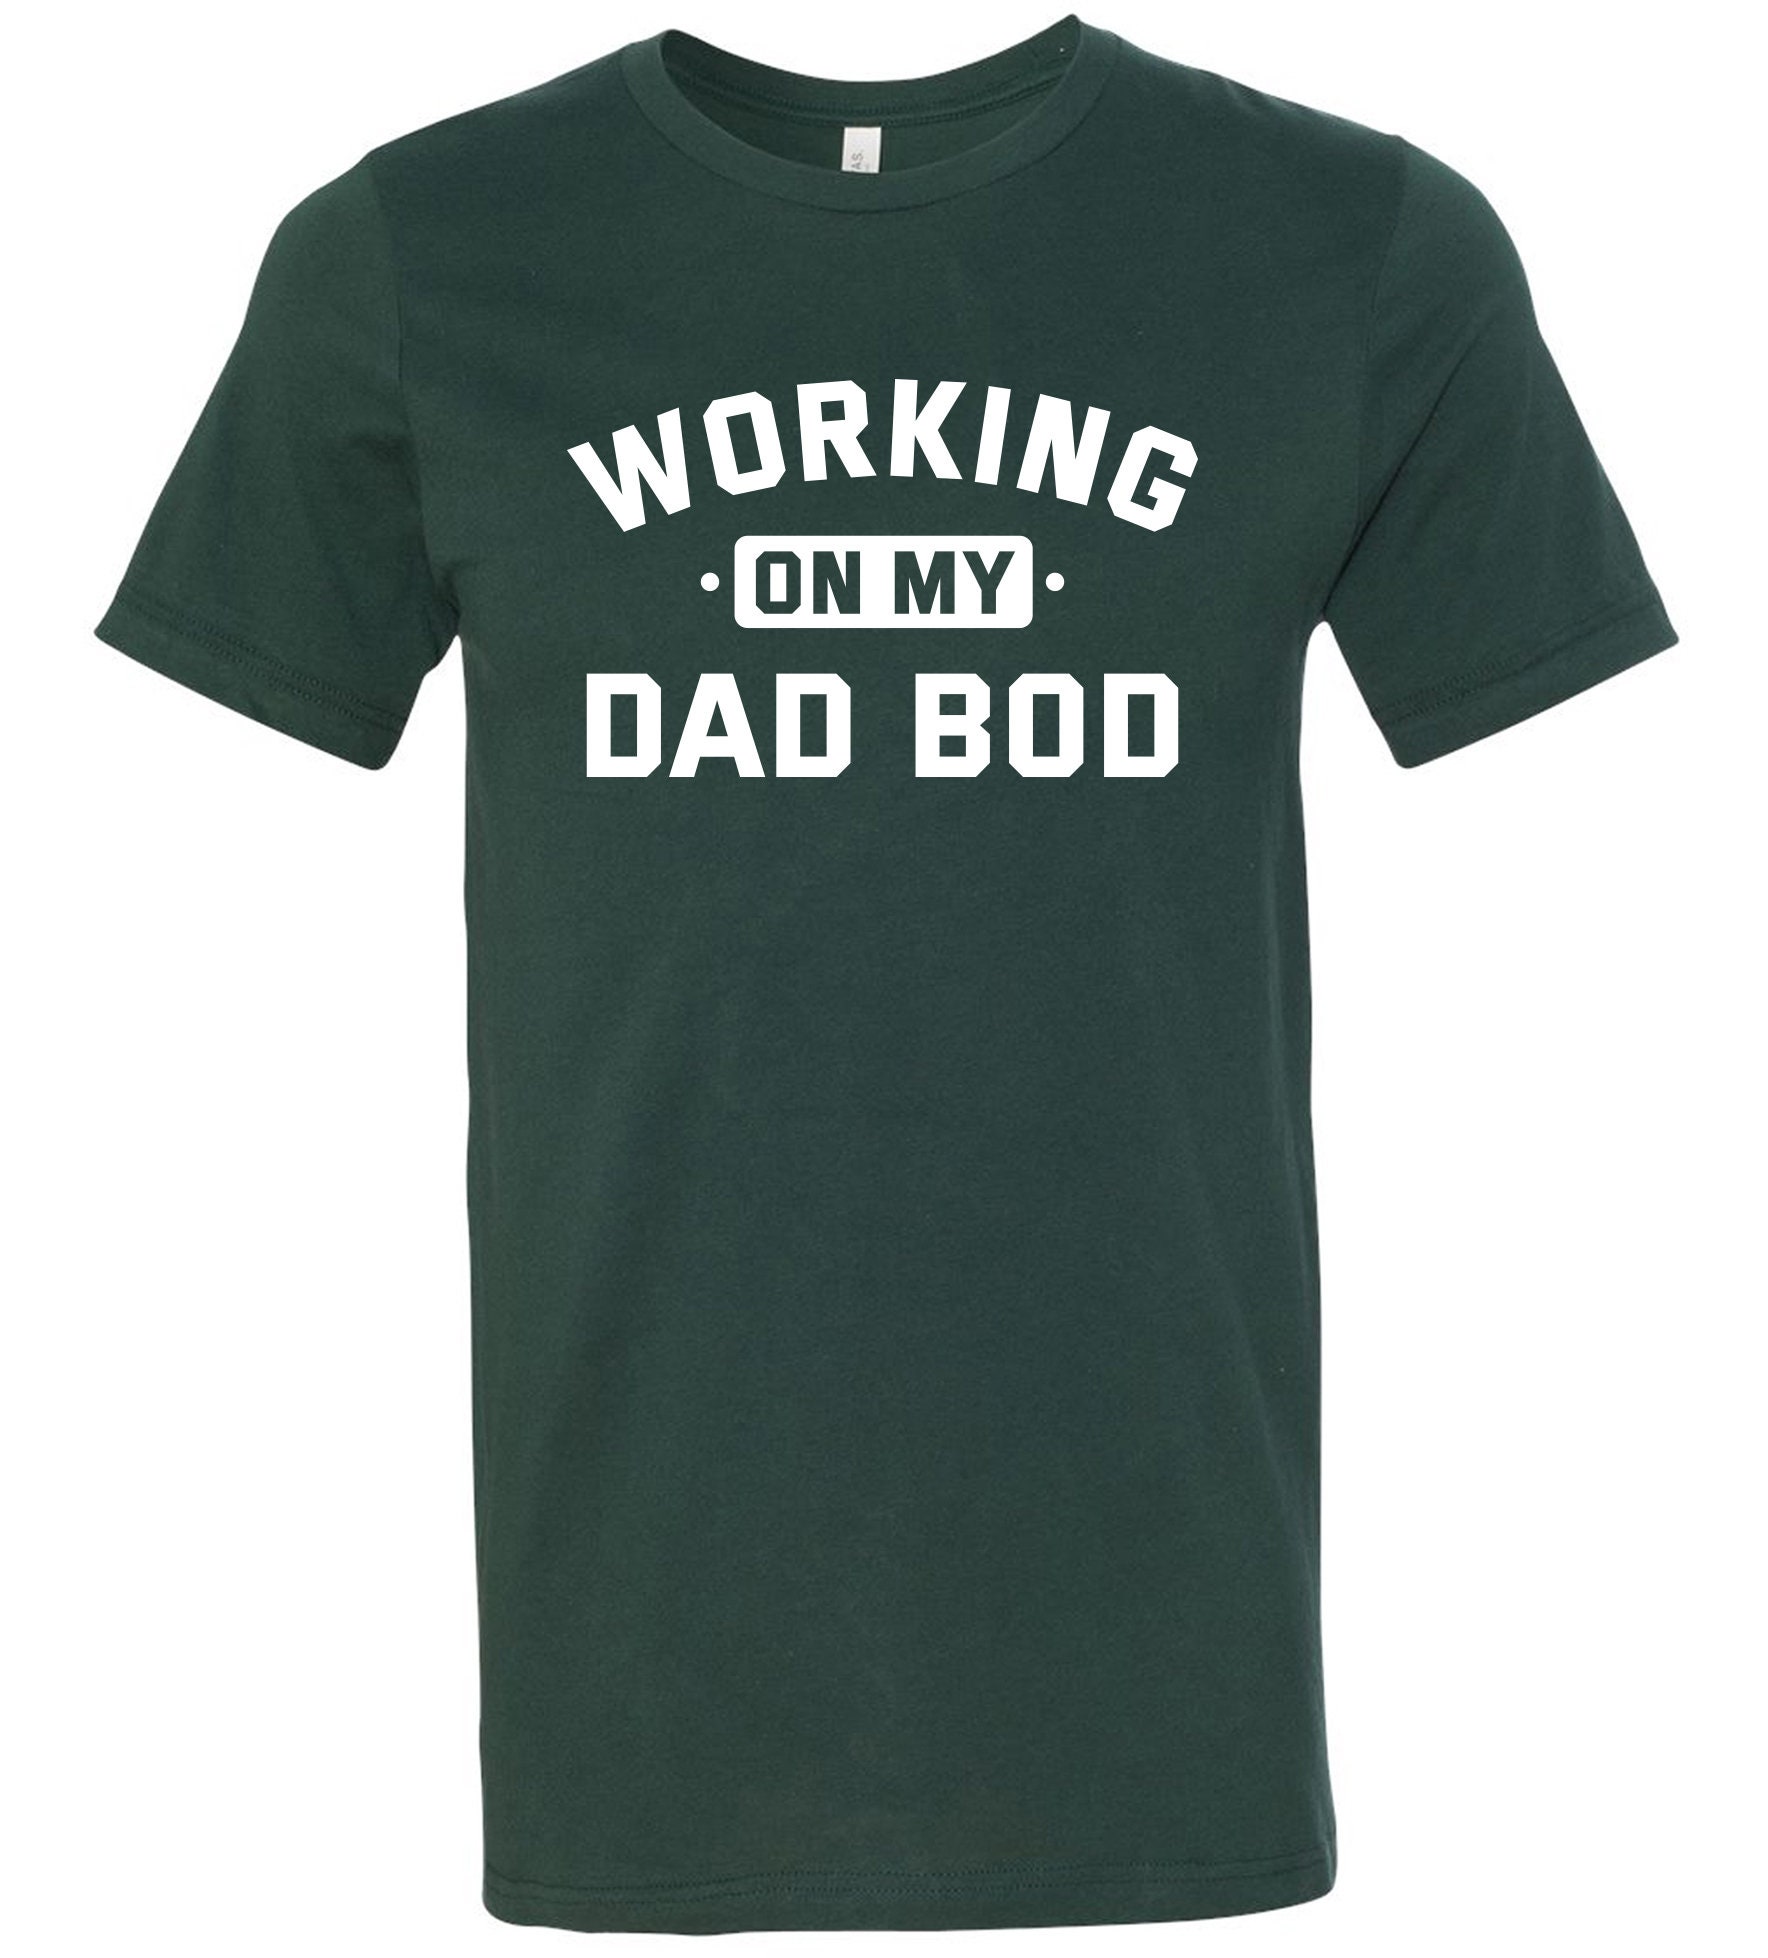 Discover Working On My Dad BOD Sarcastic T-Shirt - Graphic Father's Day Tees